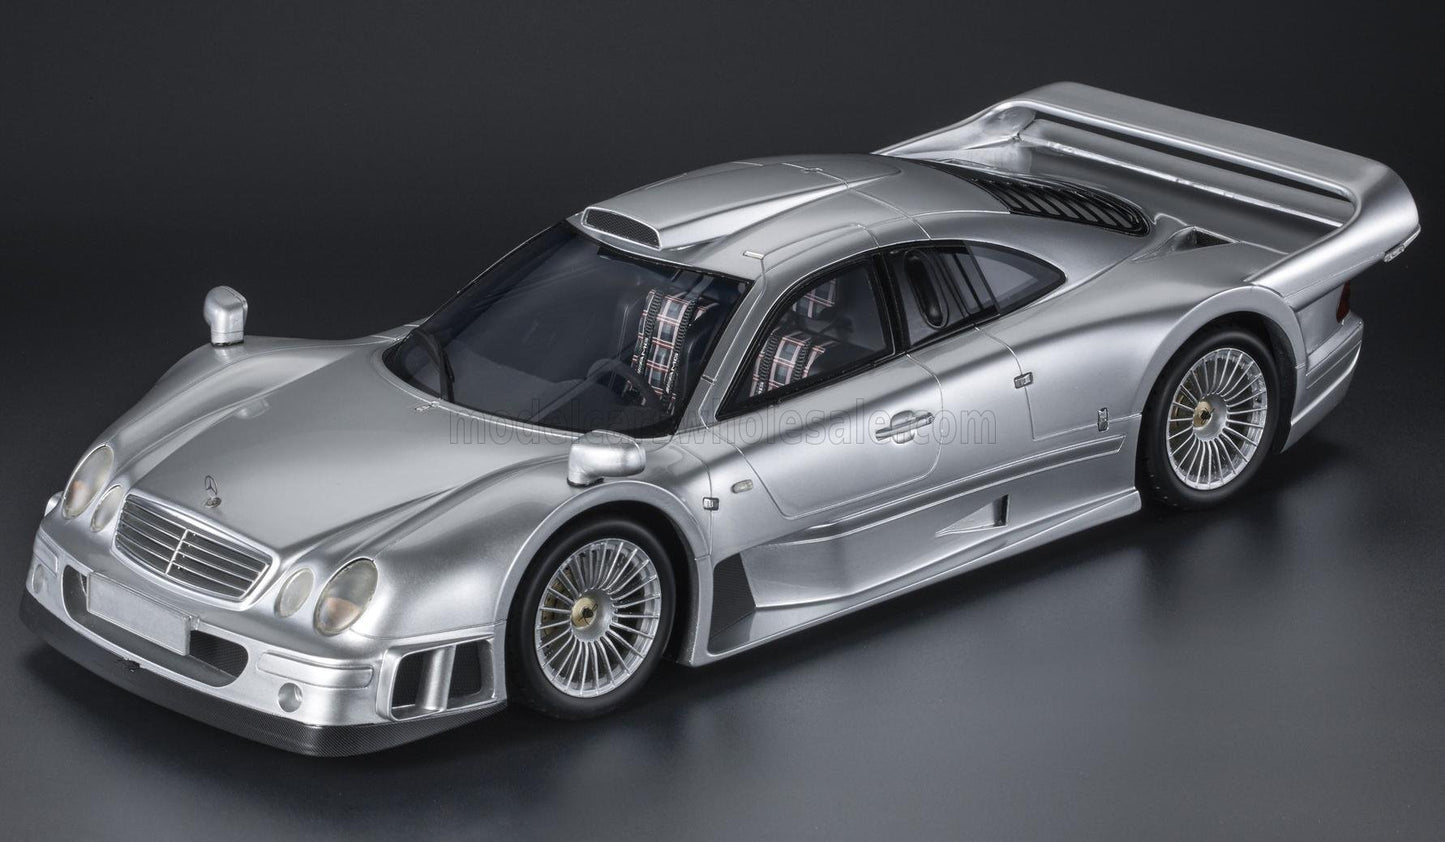 TOPMARQUES - 1/12 - MERCEDES BENZ - CLK-GTR AMG COUPE 1998 - SILVER